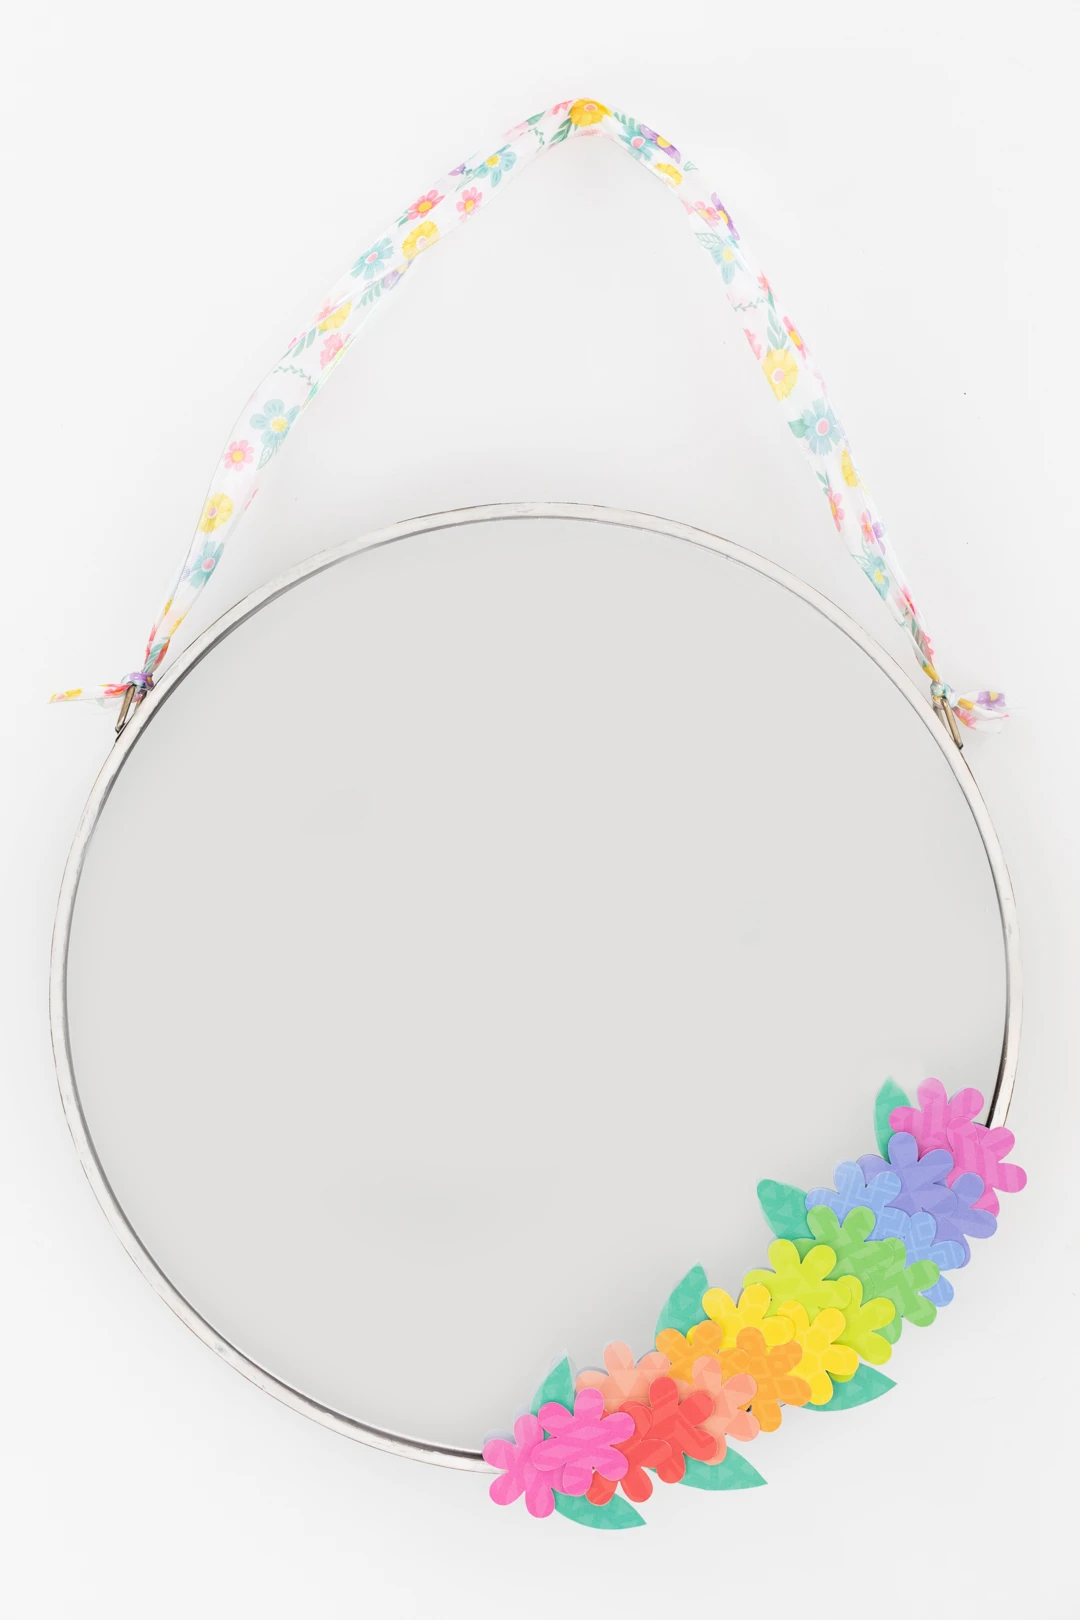 spring mirror craft with paper stationary flowers. floral wreath.